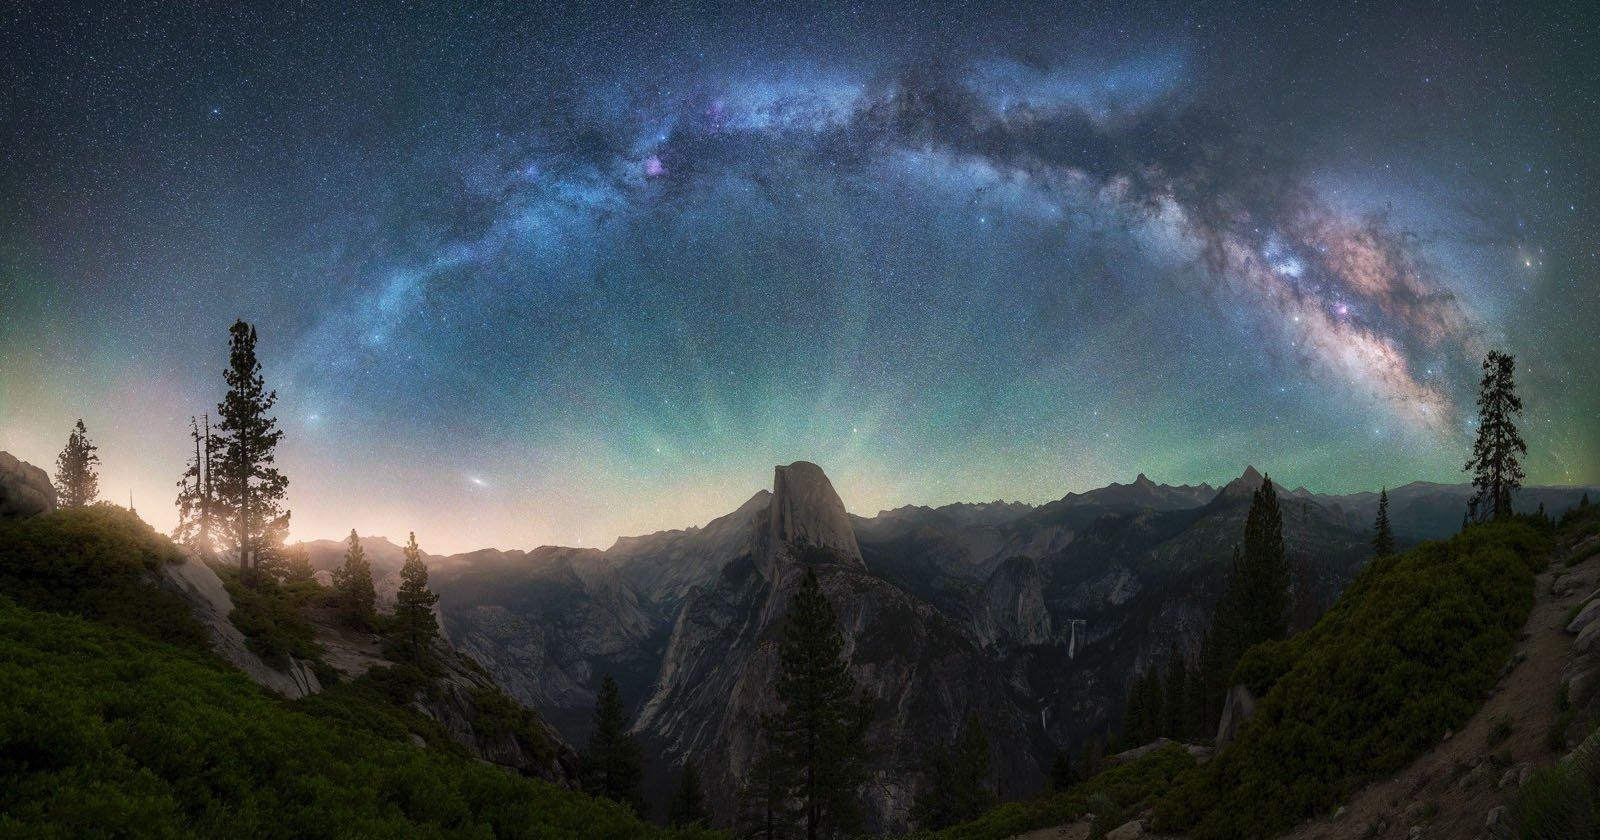 Capturing the Milky Way Over Yosemite National Park